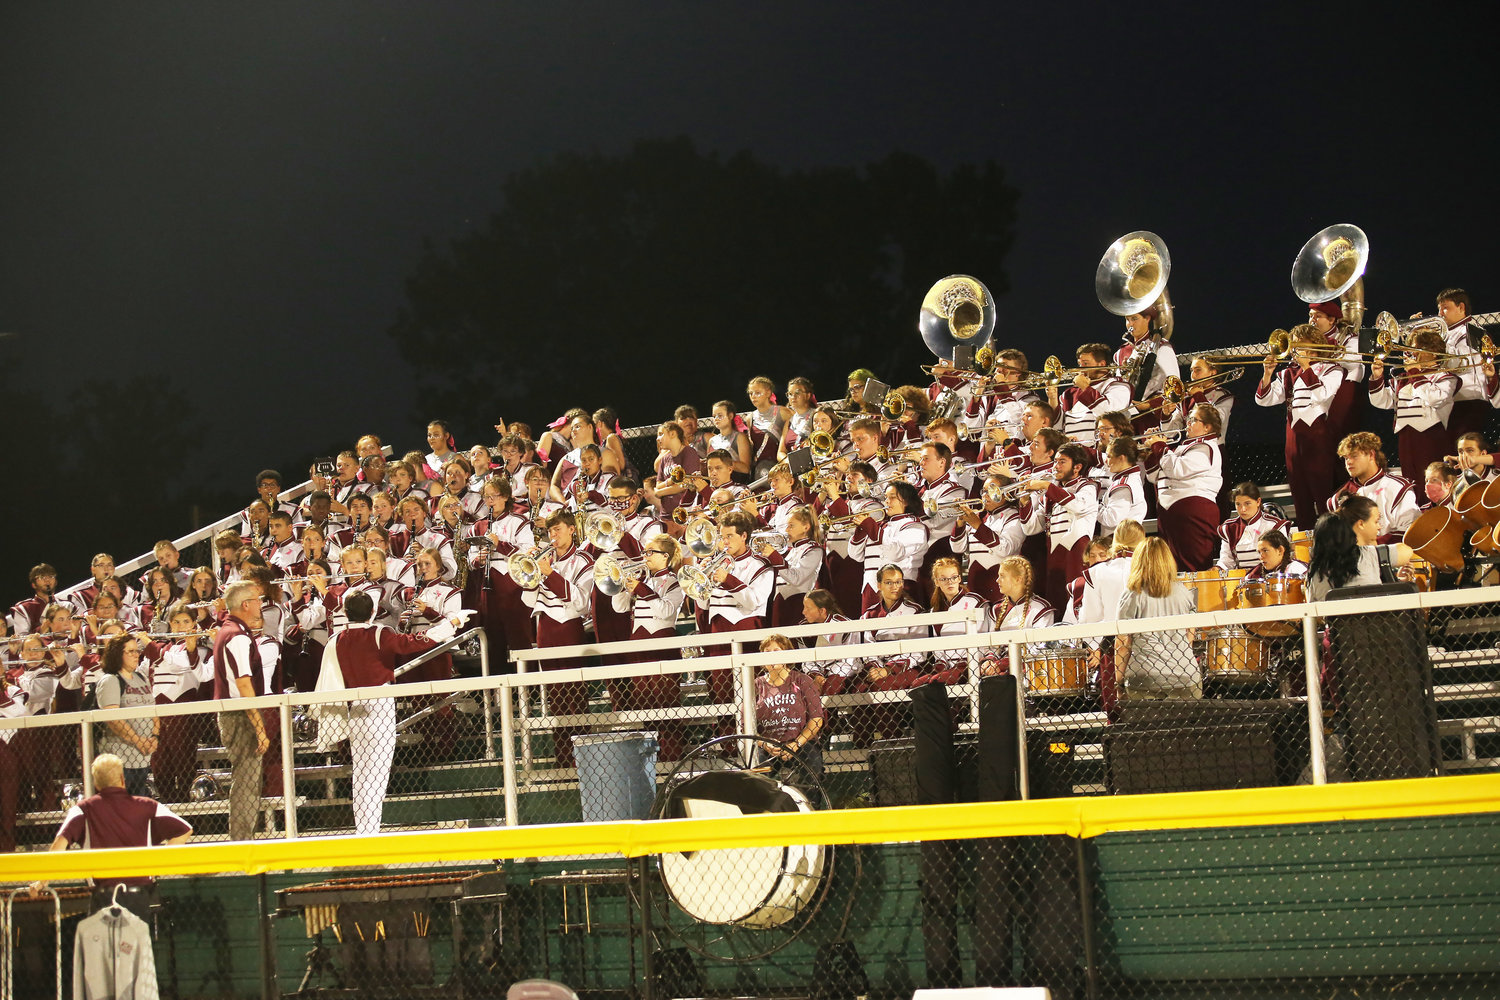 White County High School Marching Band keeps the crowd entertained. (Photo by JULIA MORRIS PHOTOGRAPHY)